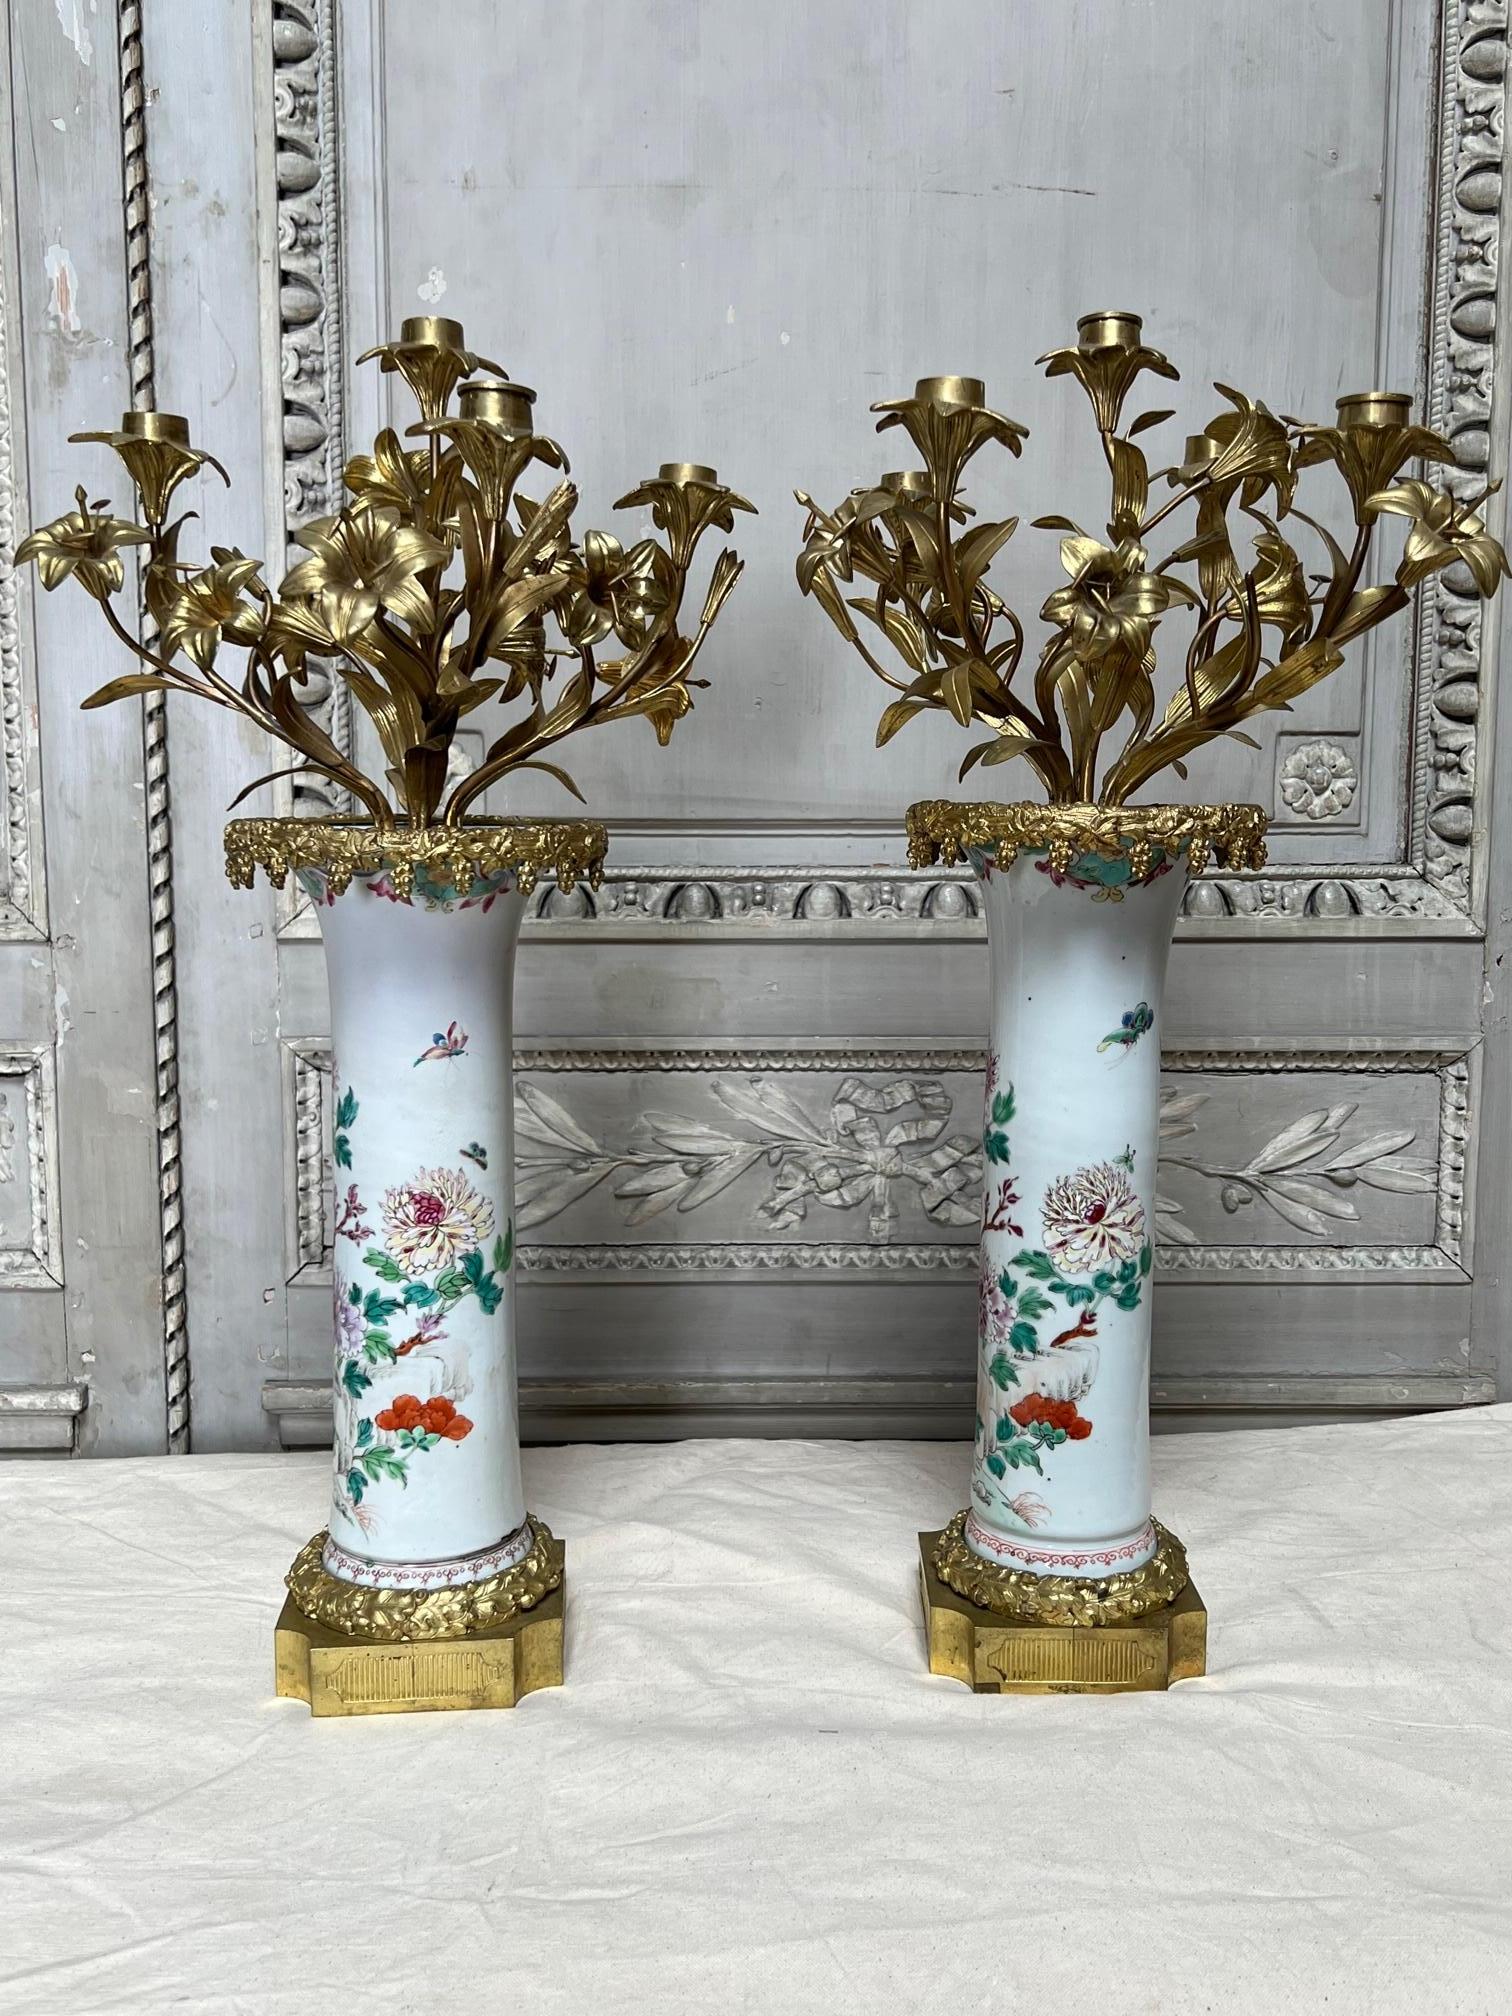 A pair of candelabra consisting of a pair of 18th century Chinese export vases mounted in 19th century French bronze in the Louis XVI style. The porcelains are very decorative and do have some damages that are underneath the bronze mountings that do